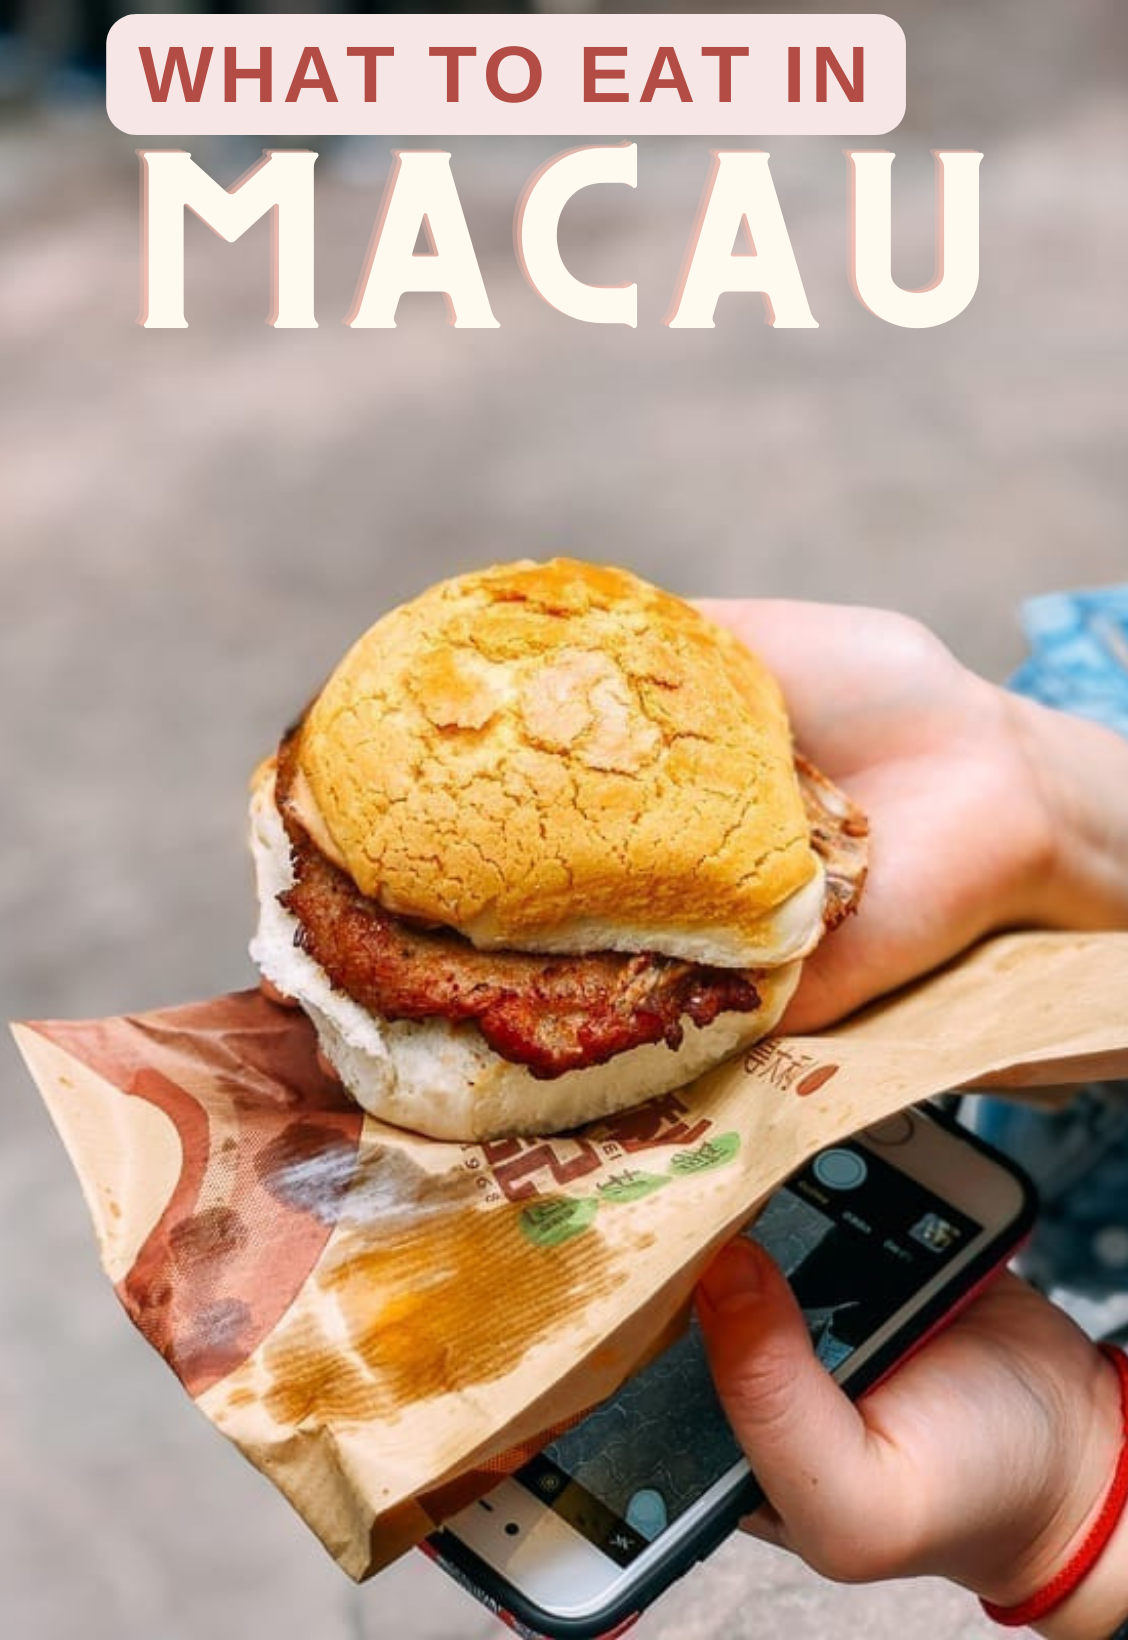 What to Eat in Macau